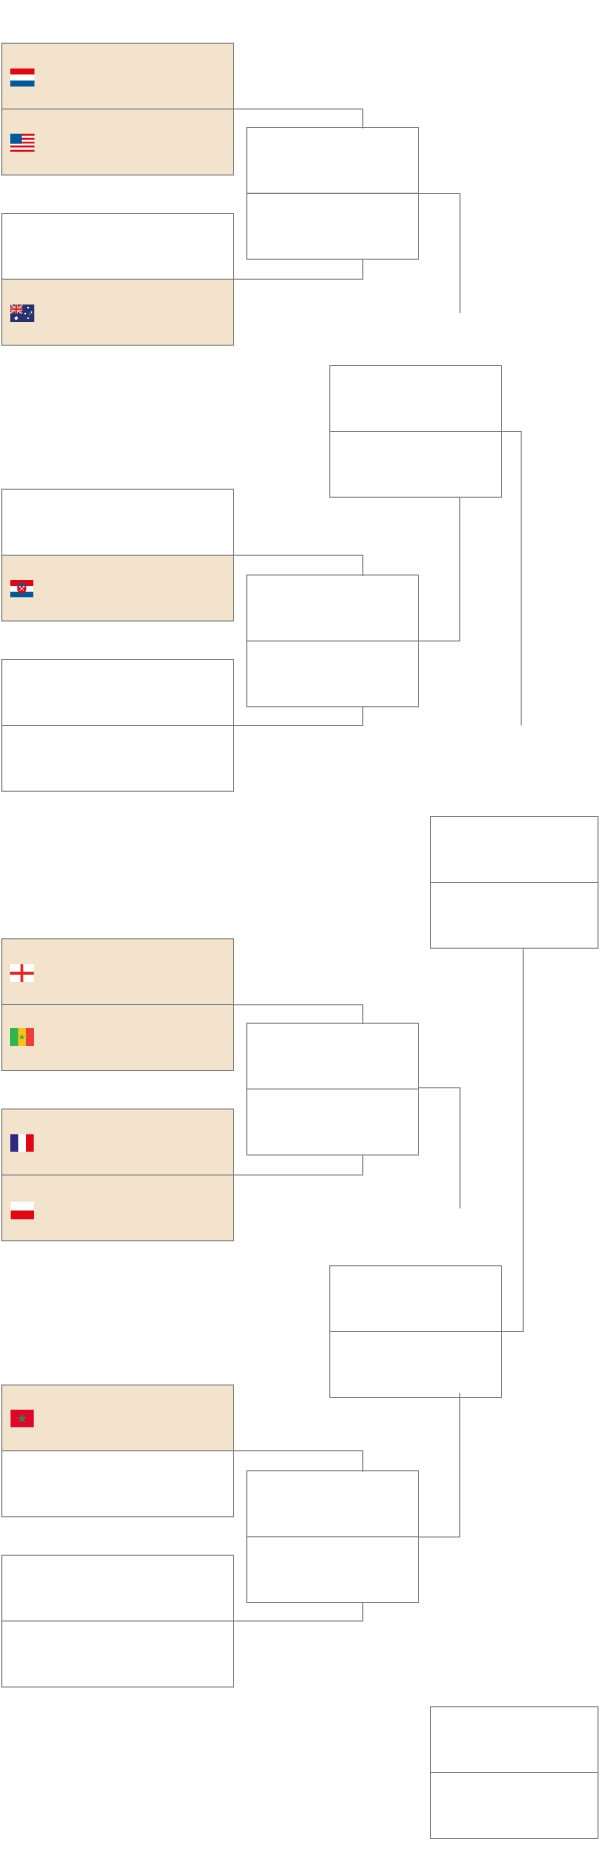 World Cup bracket and knockout round schedule